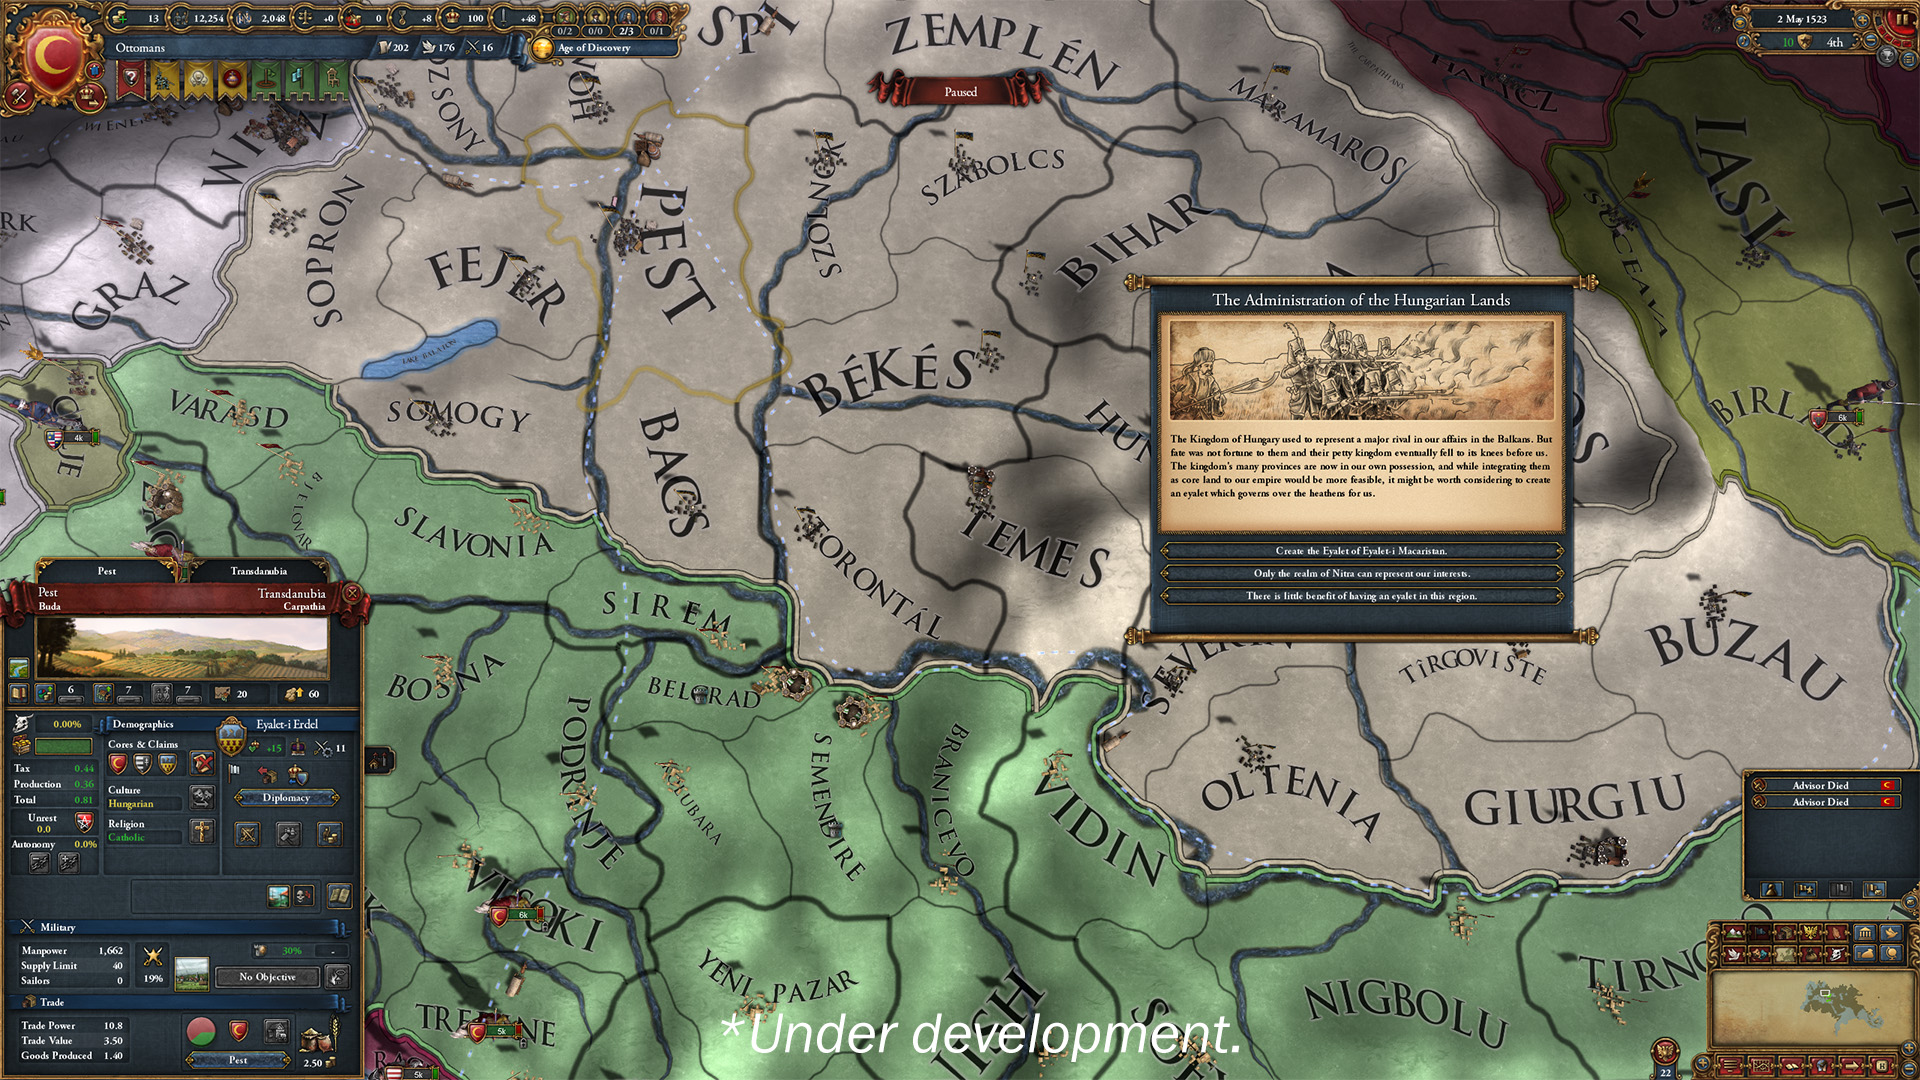 Europe Universalis 4 Domination DLC - gameplay screenshot from an Ottoman campaign